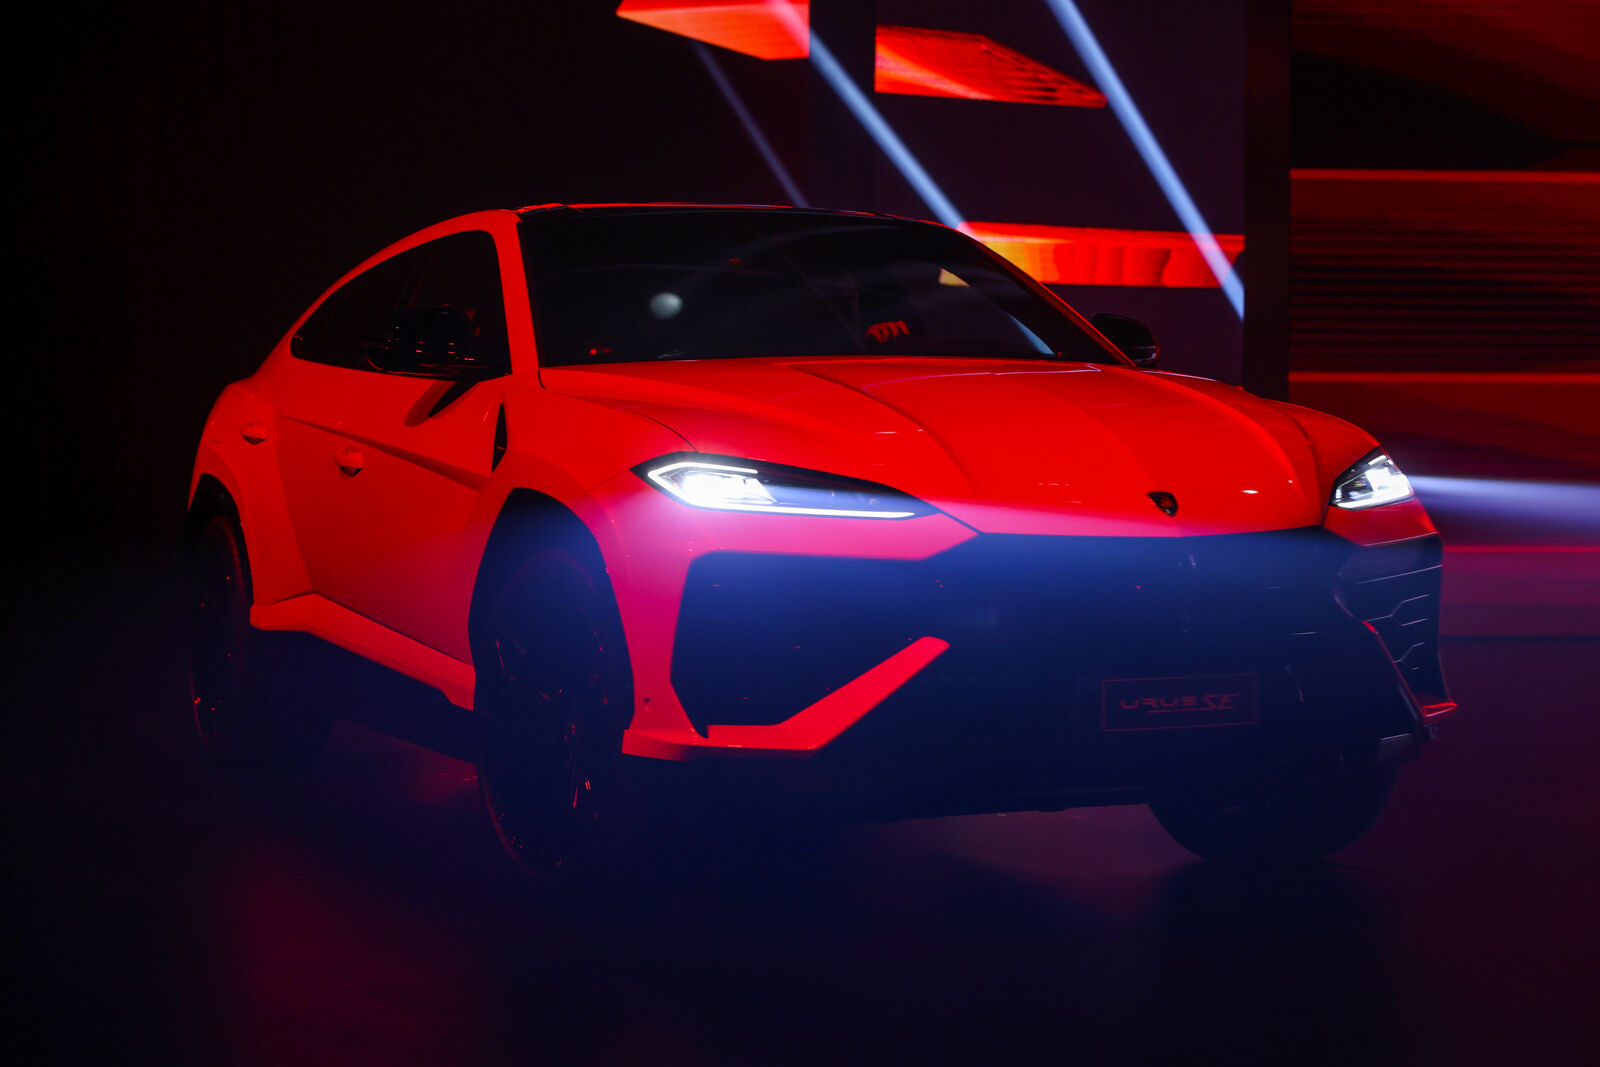 A bright red Lamborghini Urus S SUV is dramatically lit on stage, with a black background and accentuated by vivid red lighting.